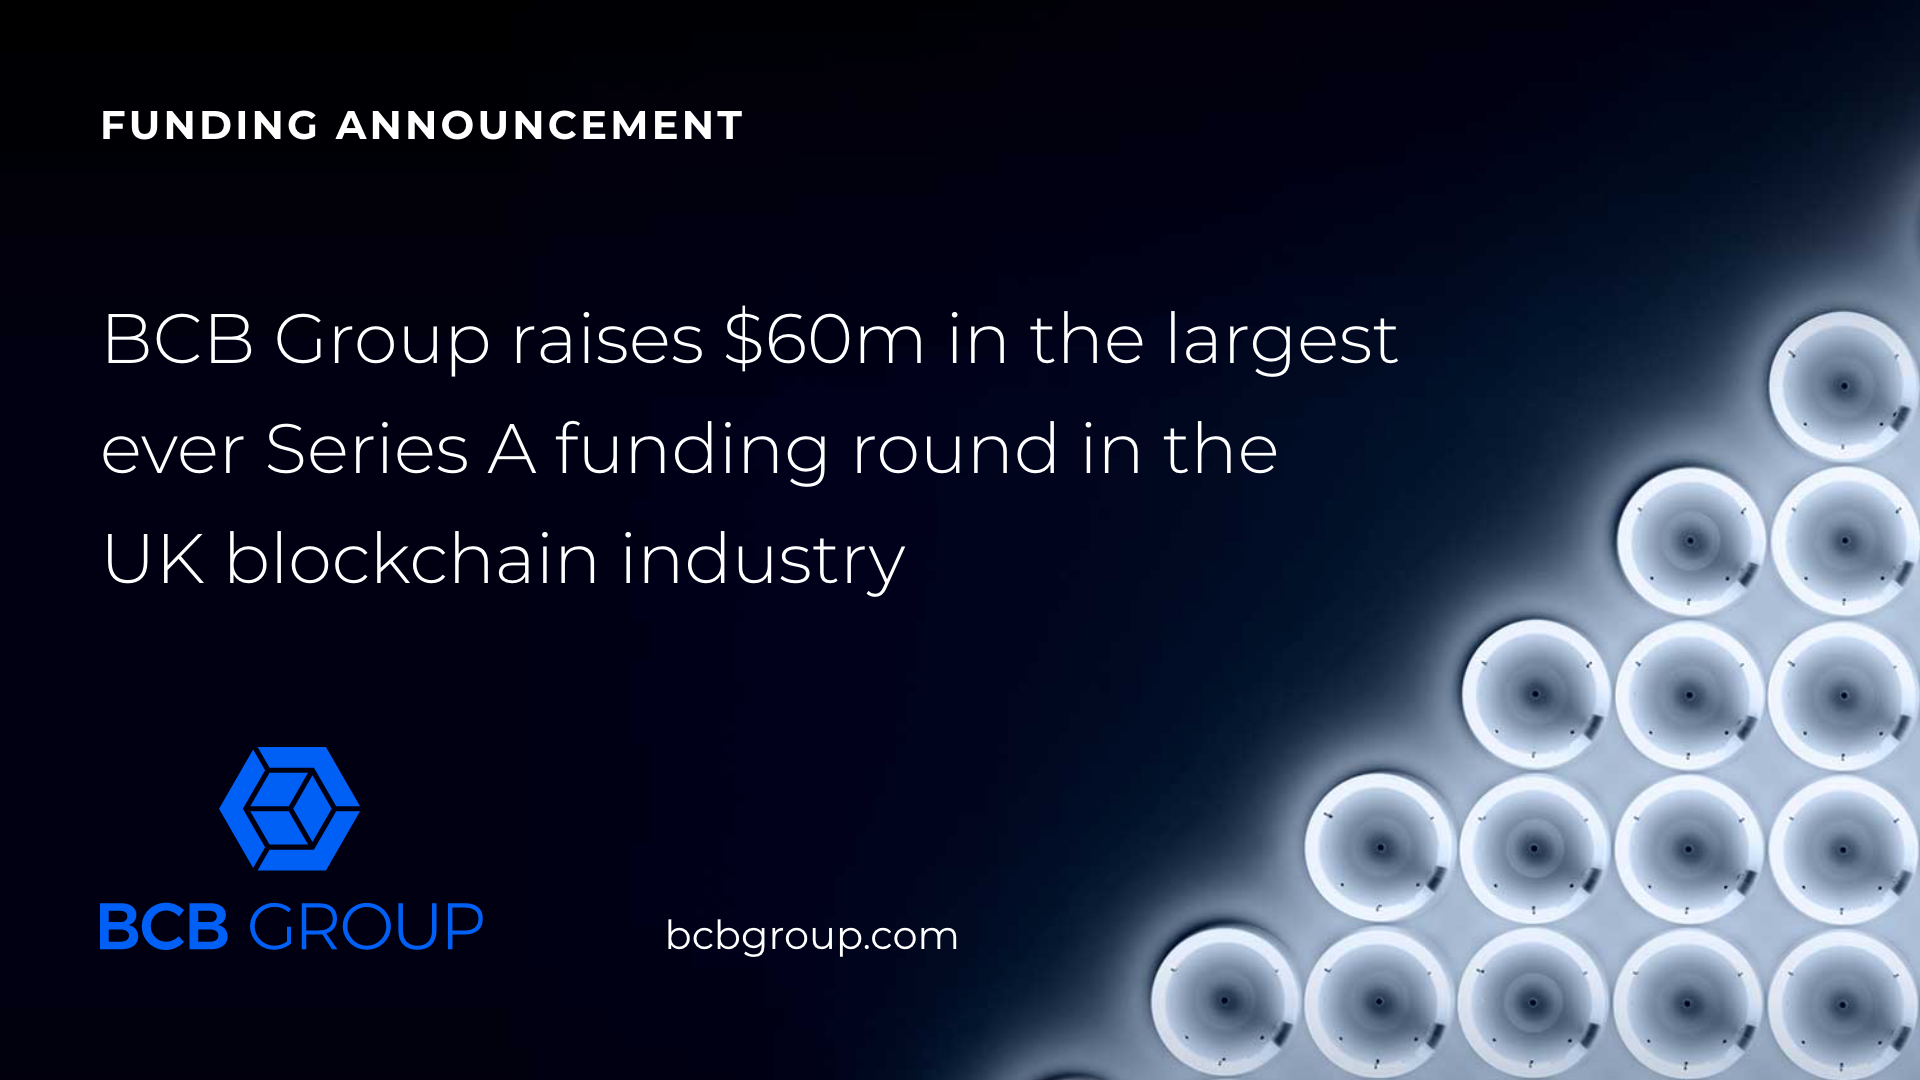 BCB GROUP RAISES $60M IN THE LARGEST EVER SERIES A FUNDING ROUND IN THE UK BLOCKCHAIN INDUSTRY